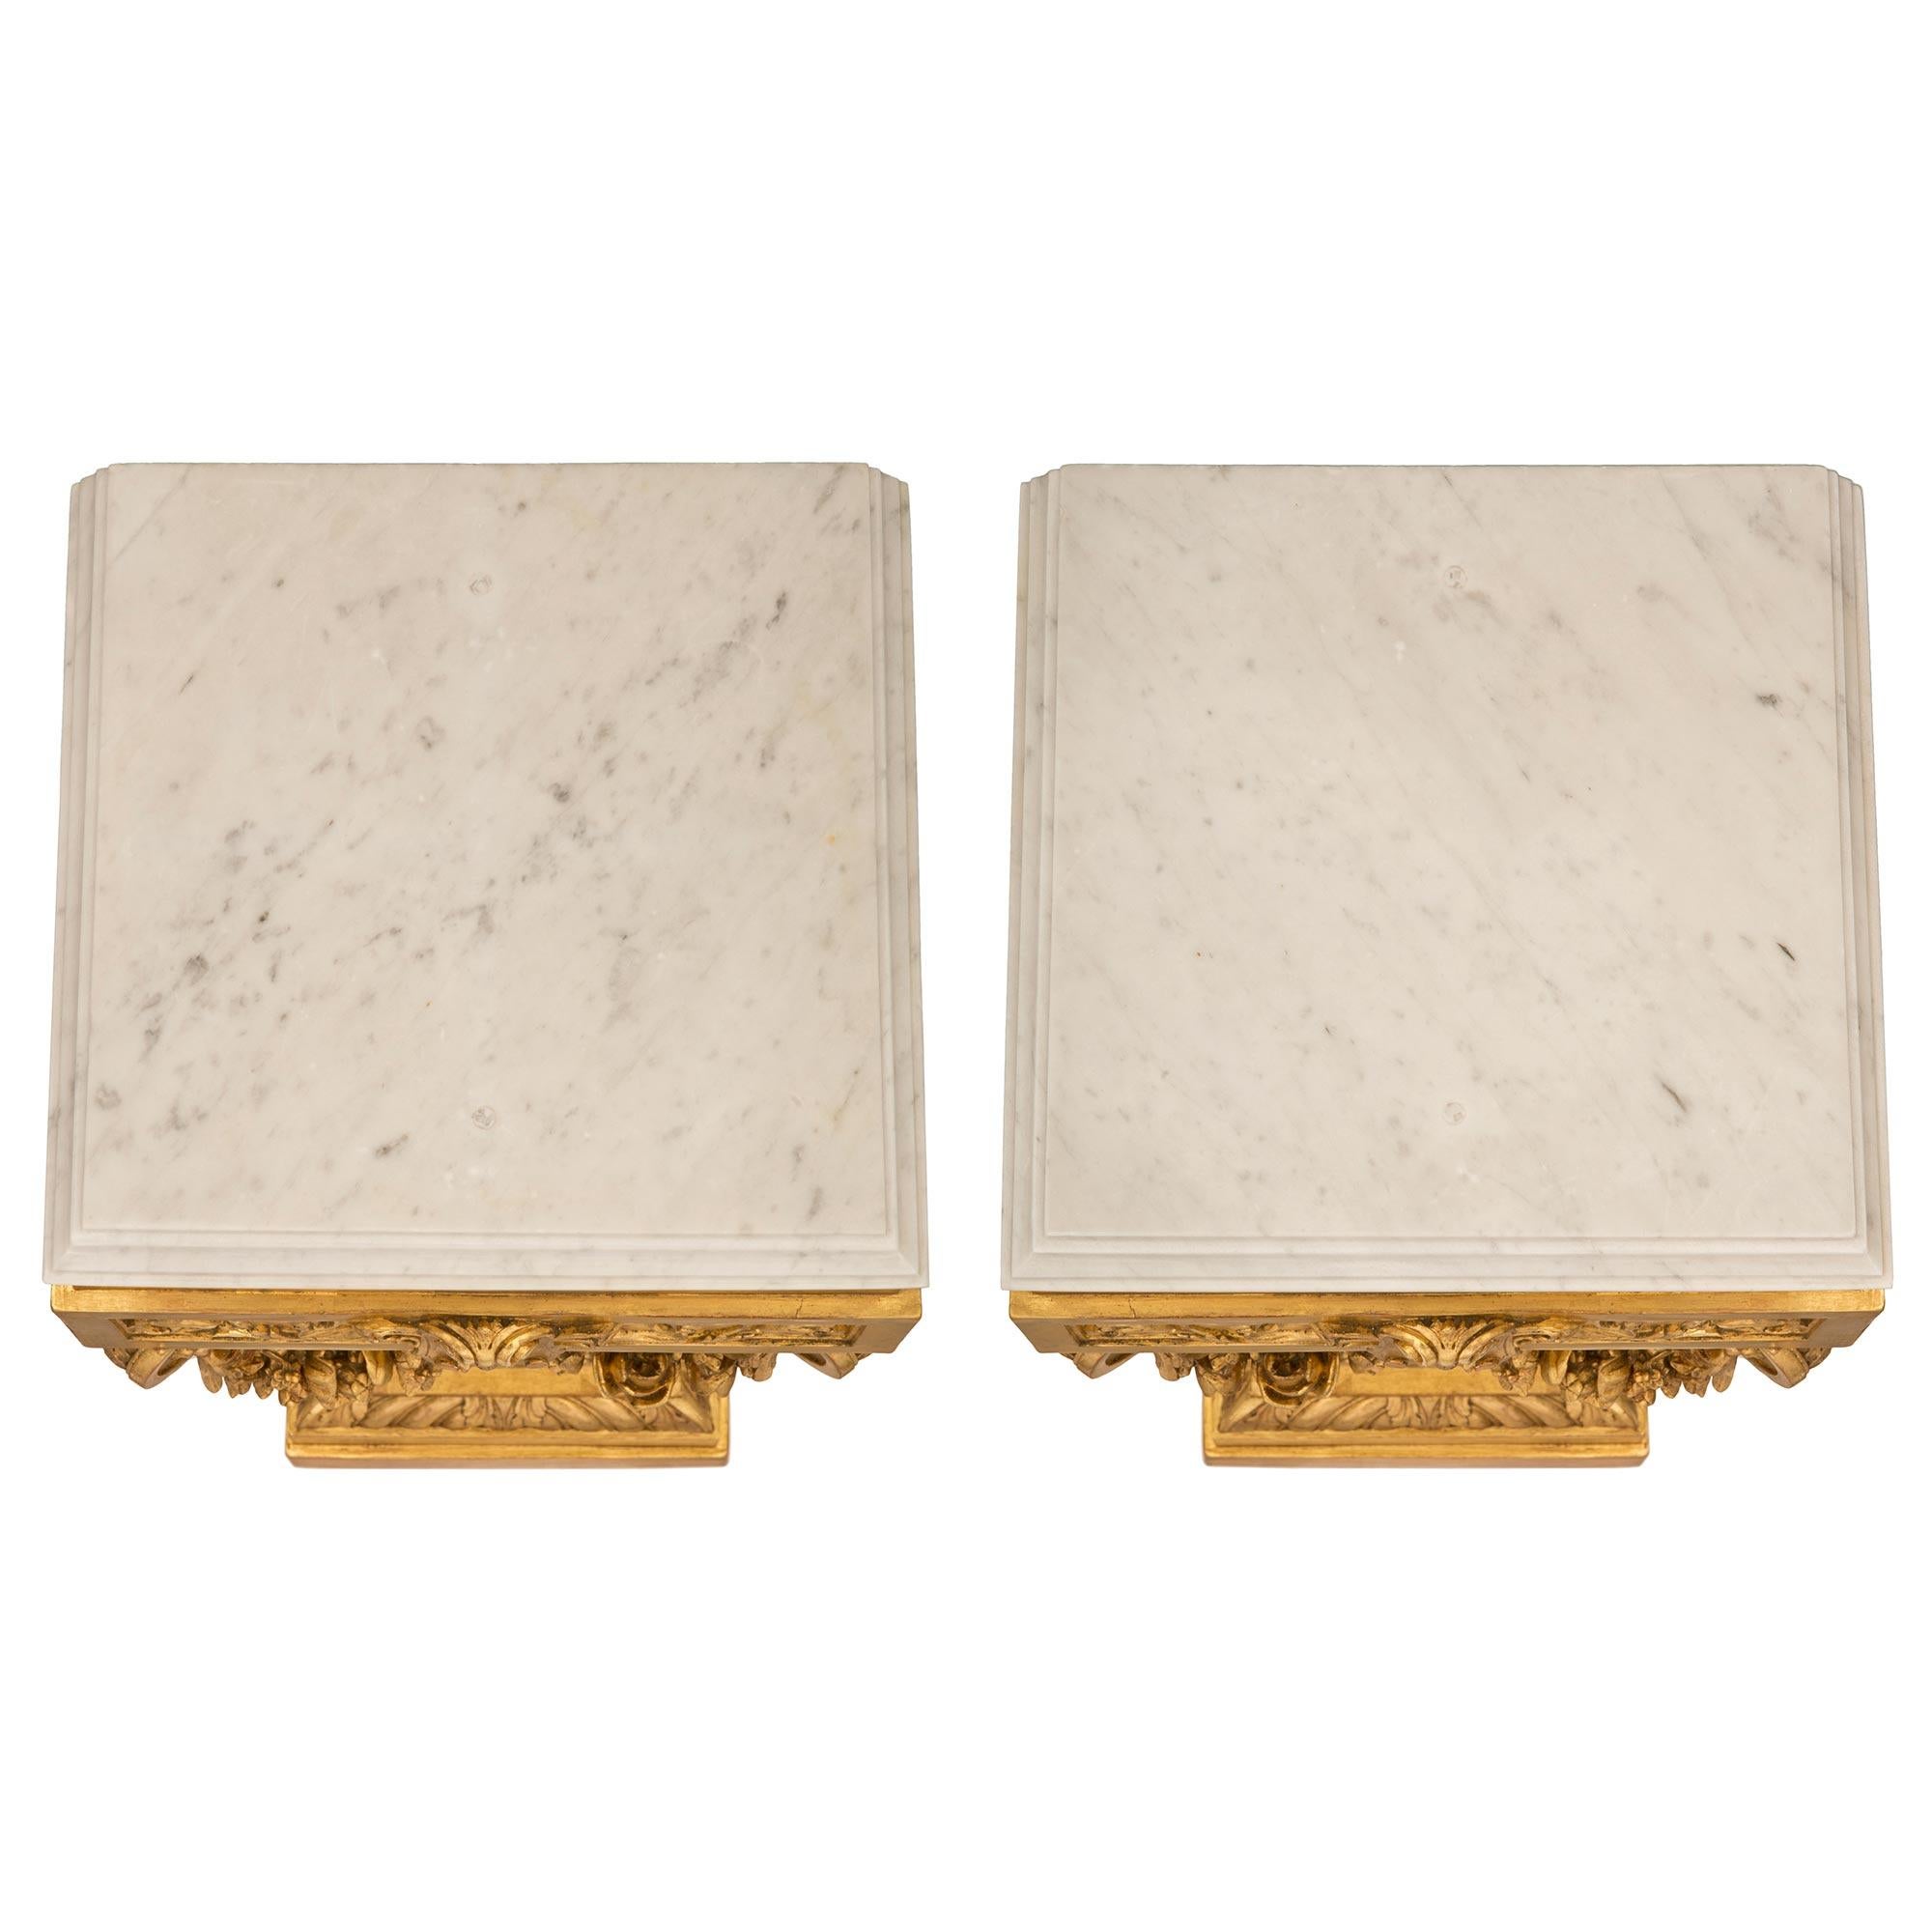 An impressive and high quality pair of French 19th century Louis XVI st. Napoleon III period giltwood and white Carrara marble pedestal columns. Each pedestal is raised by a square base with a stepped design and a most decorative gadroon design with